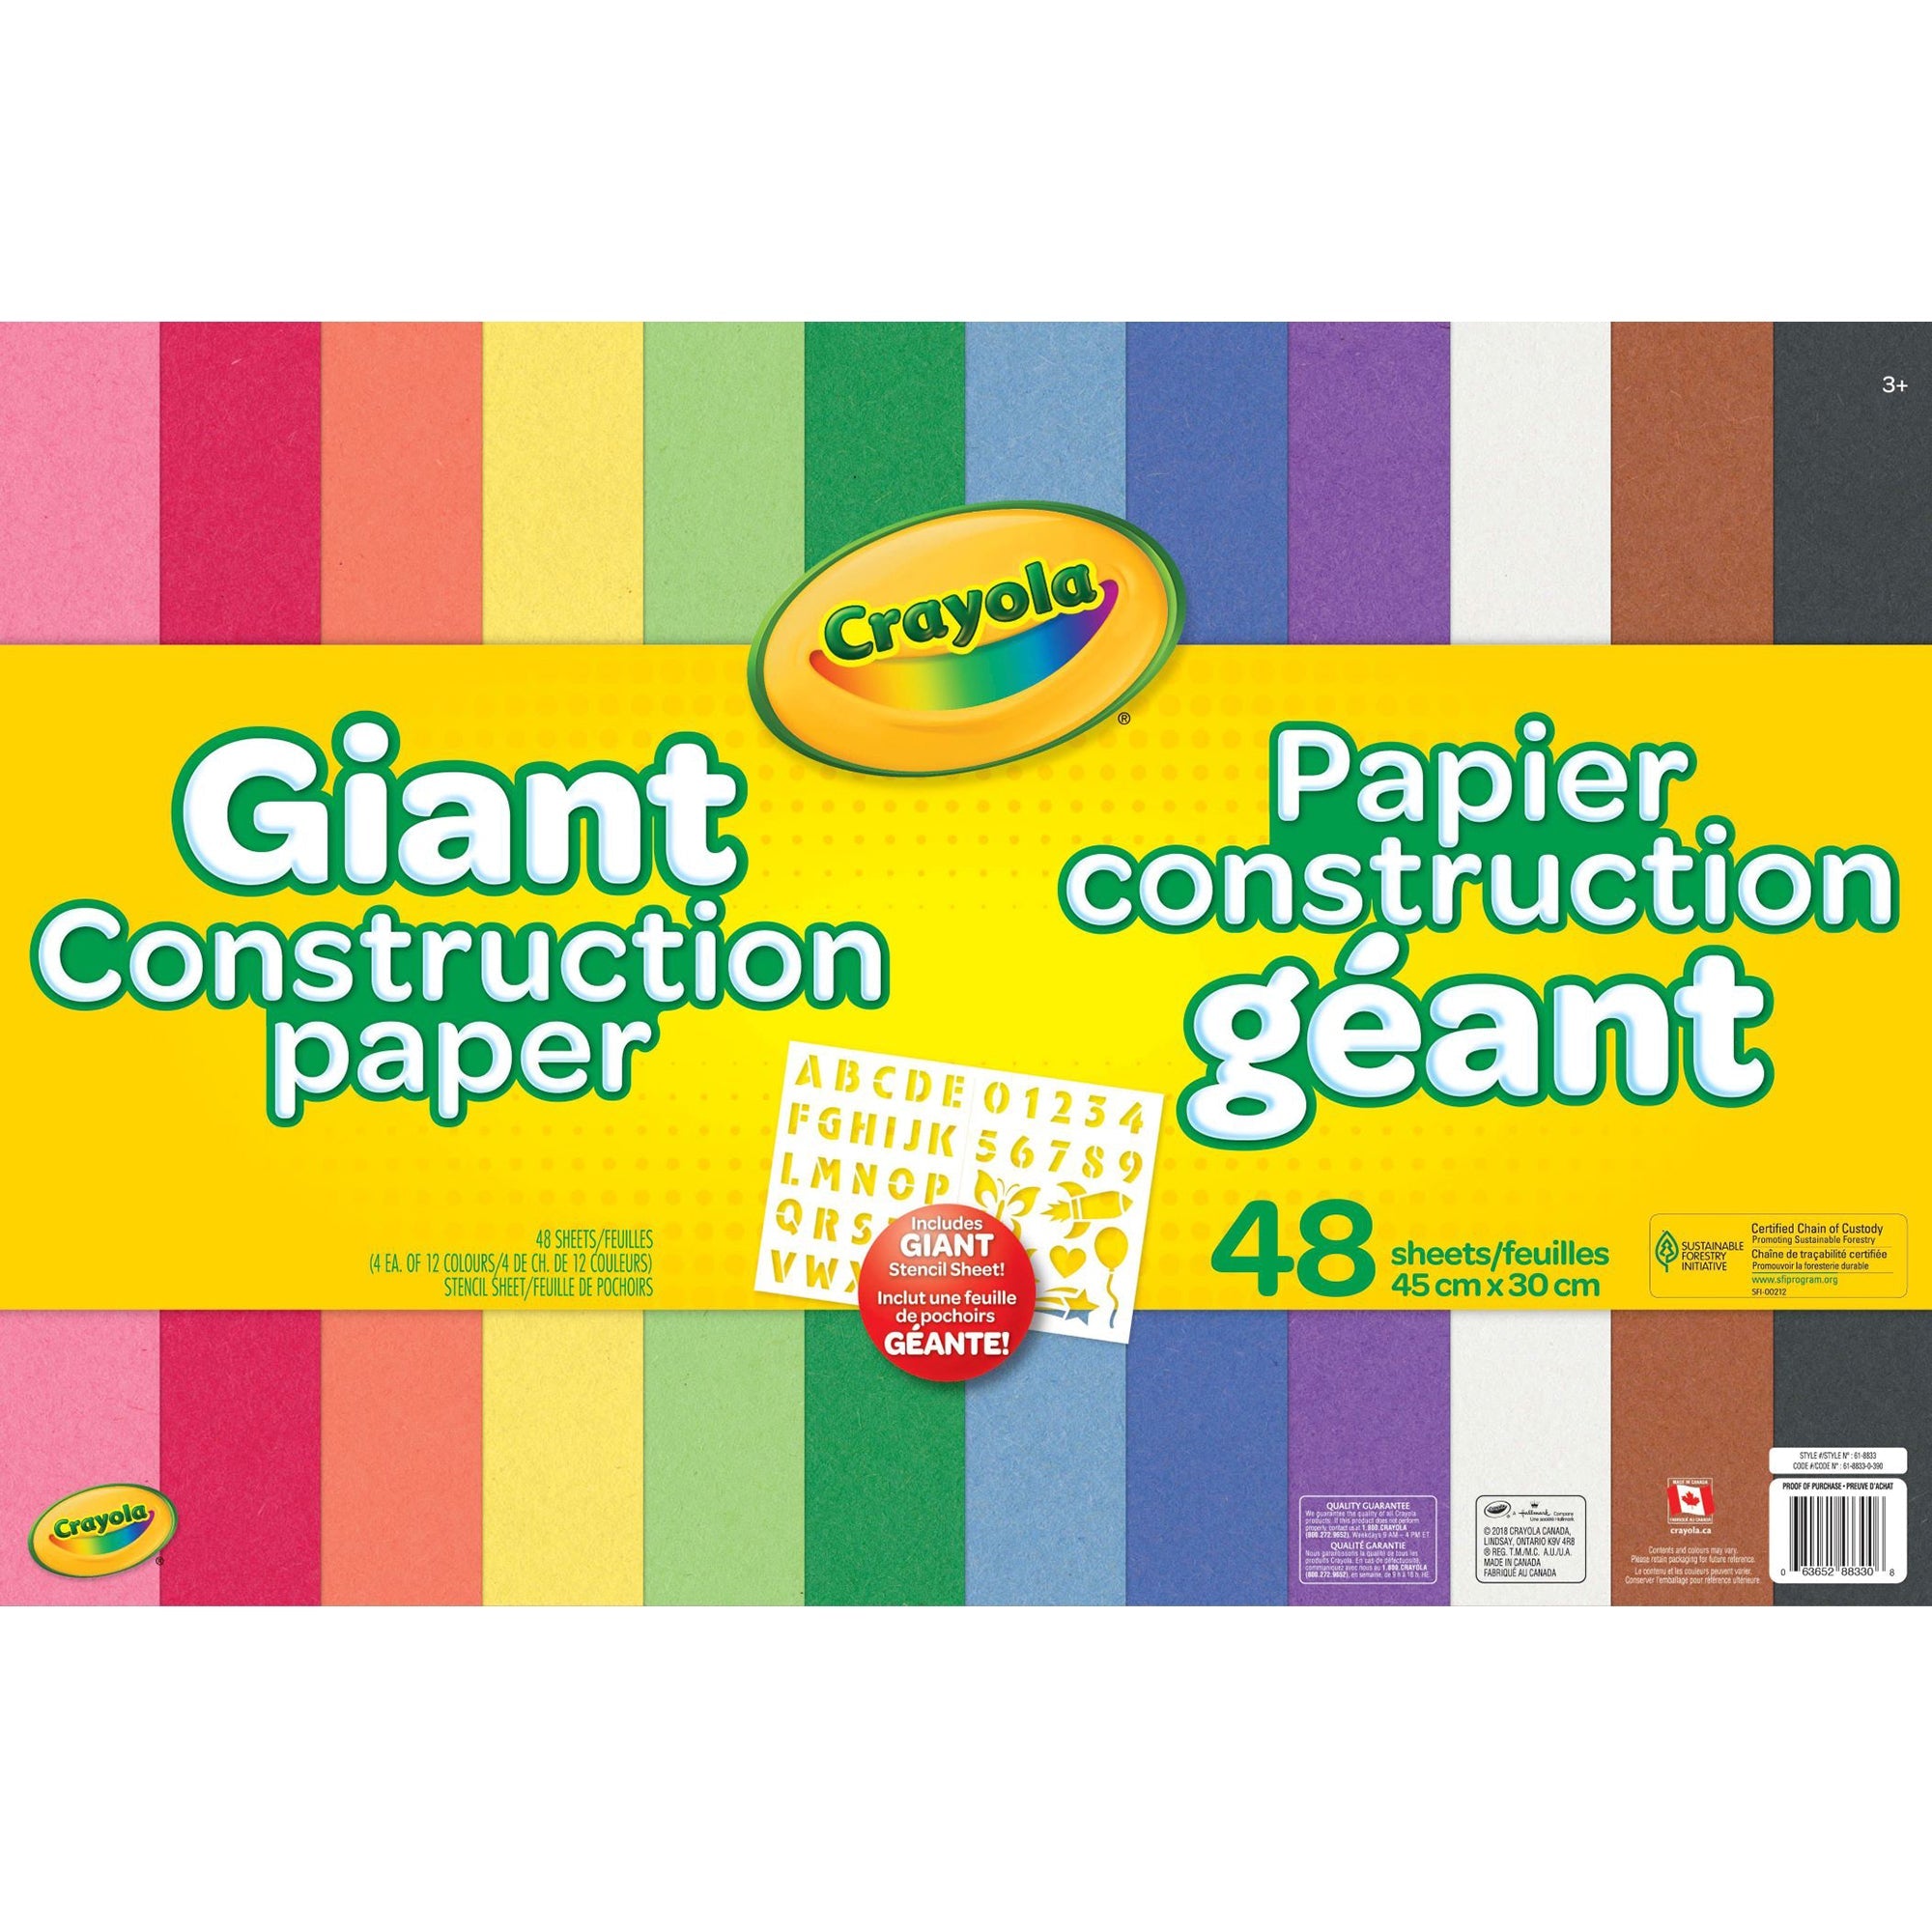 Crayola Giant Construction Paper with Stencil - 48 Sheets 17.7x11.8in (45x30cm)